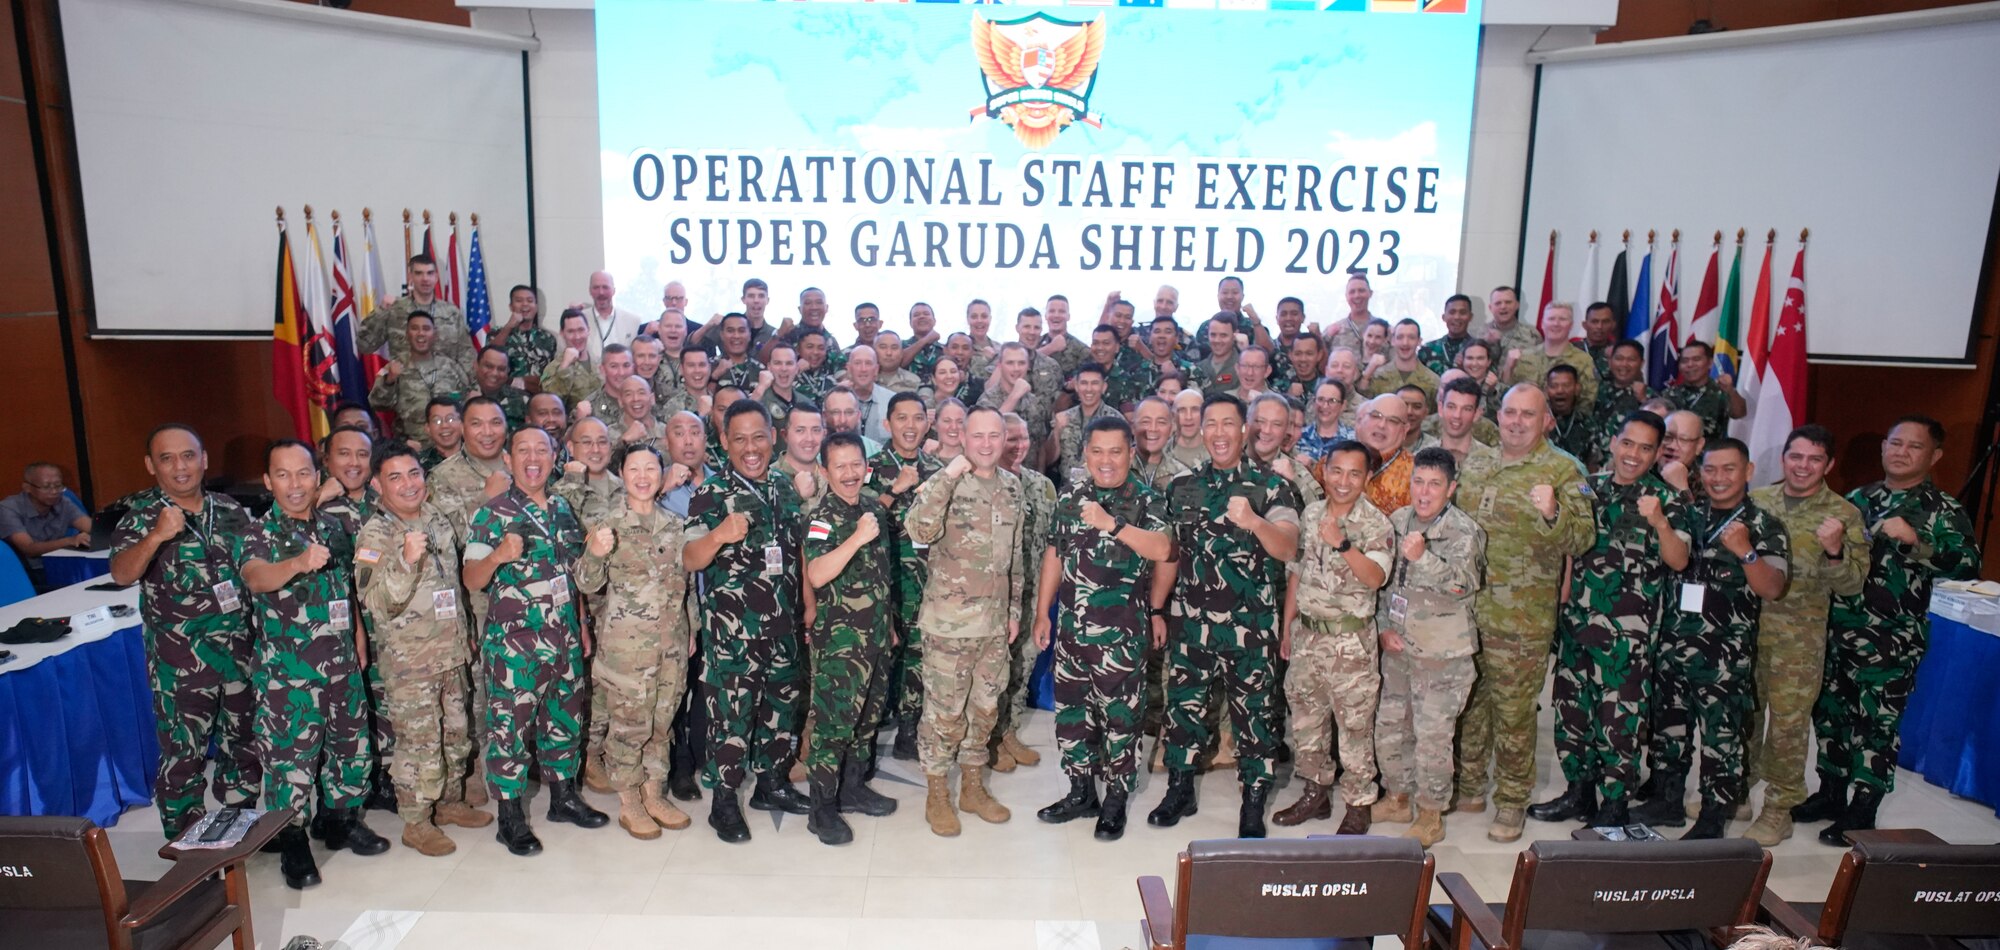 Participants in the staff exercise portion of Super Garuda Shield 2023 pose for a group photo after the opening ceremony Aug. 31, 2023, in Surabaya Indonesia.